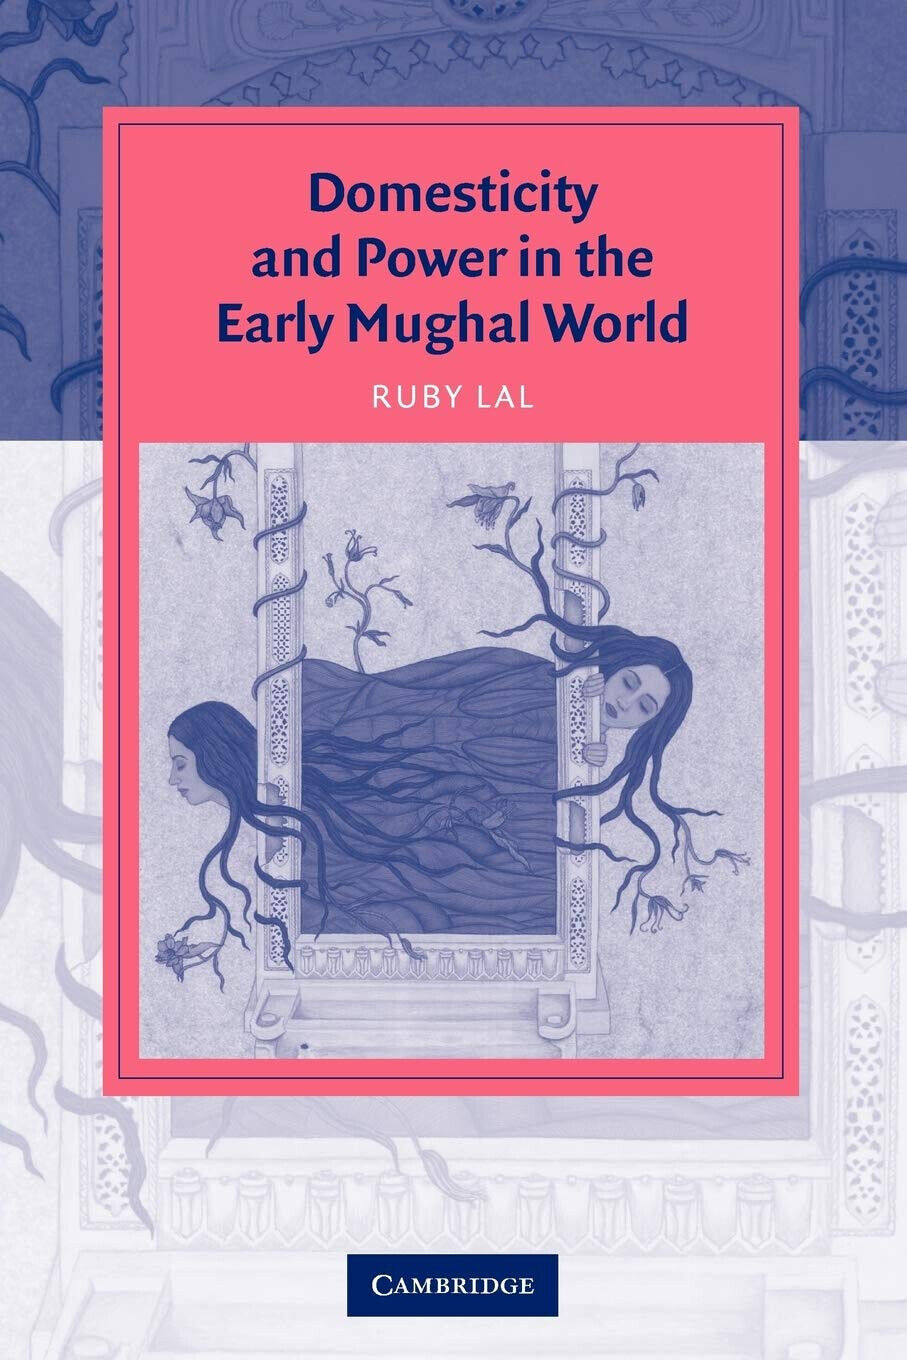 Domesticity and Power in the Early Mughal World - Ruby Lal - Cambridge, 2005 libro usato